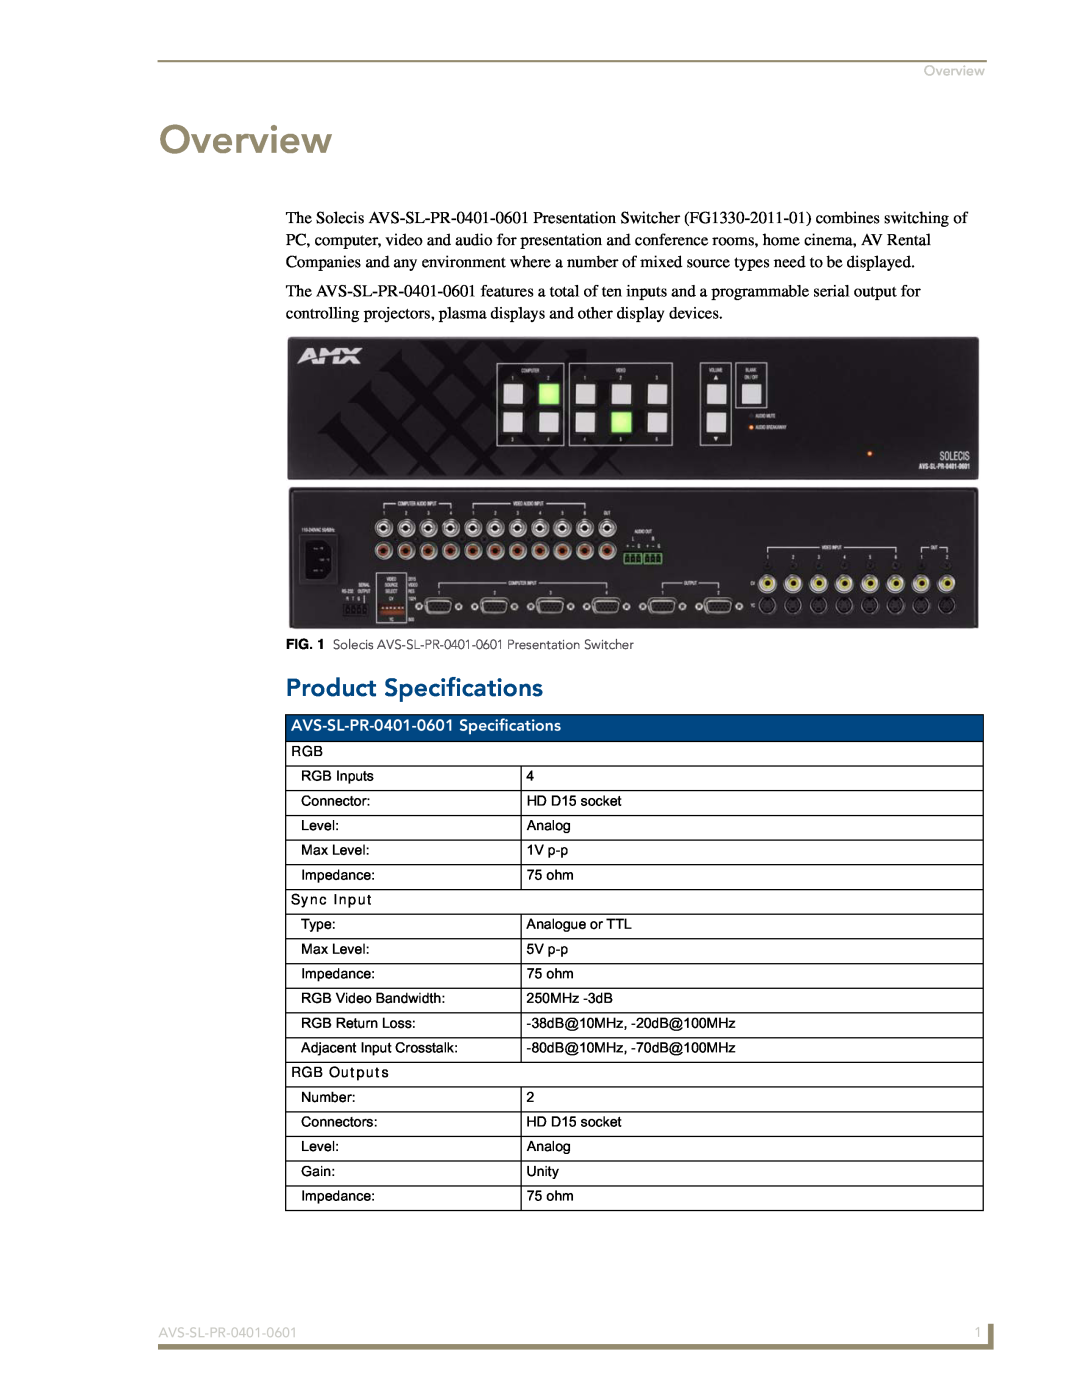 AMX AVS-SL-PR-0401-0601 manual Overview, Product Specifications 